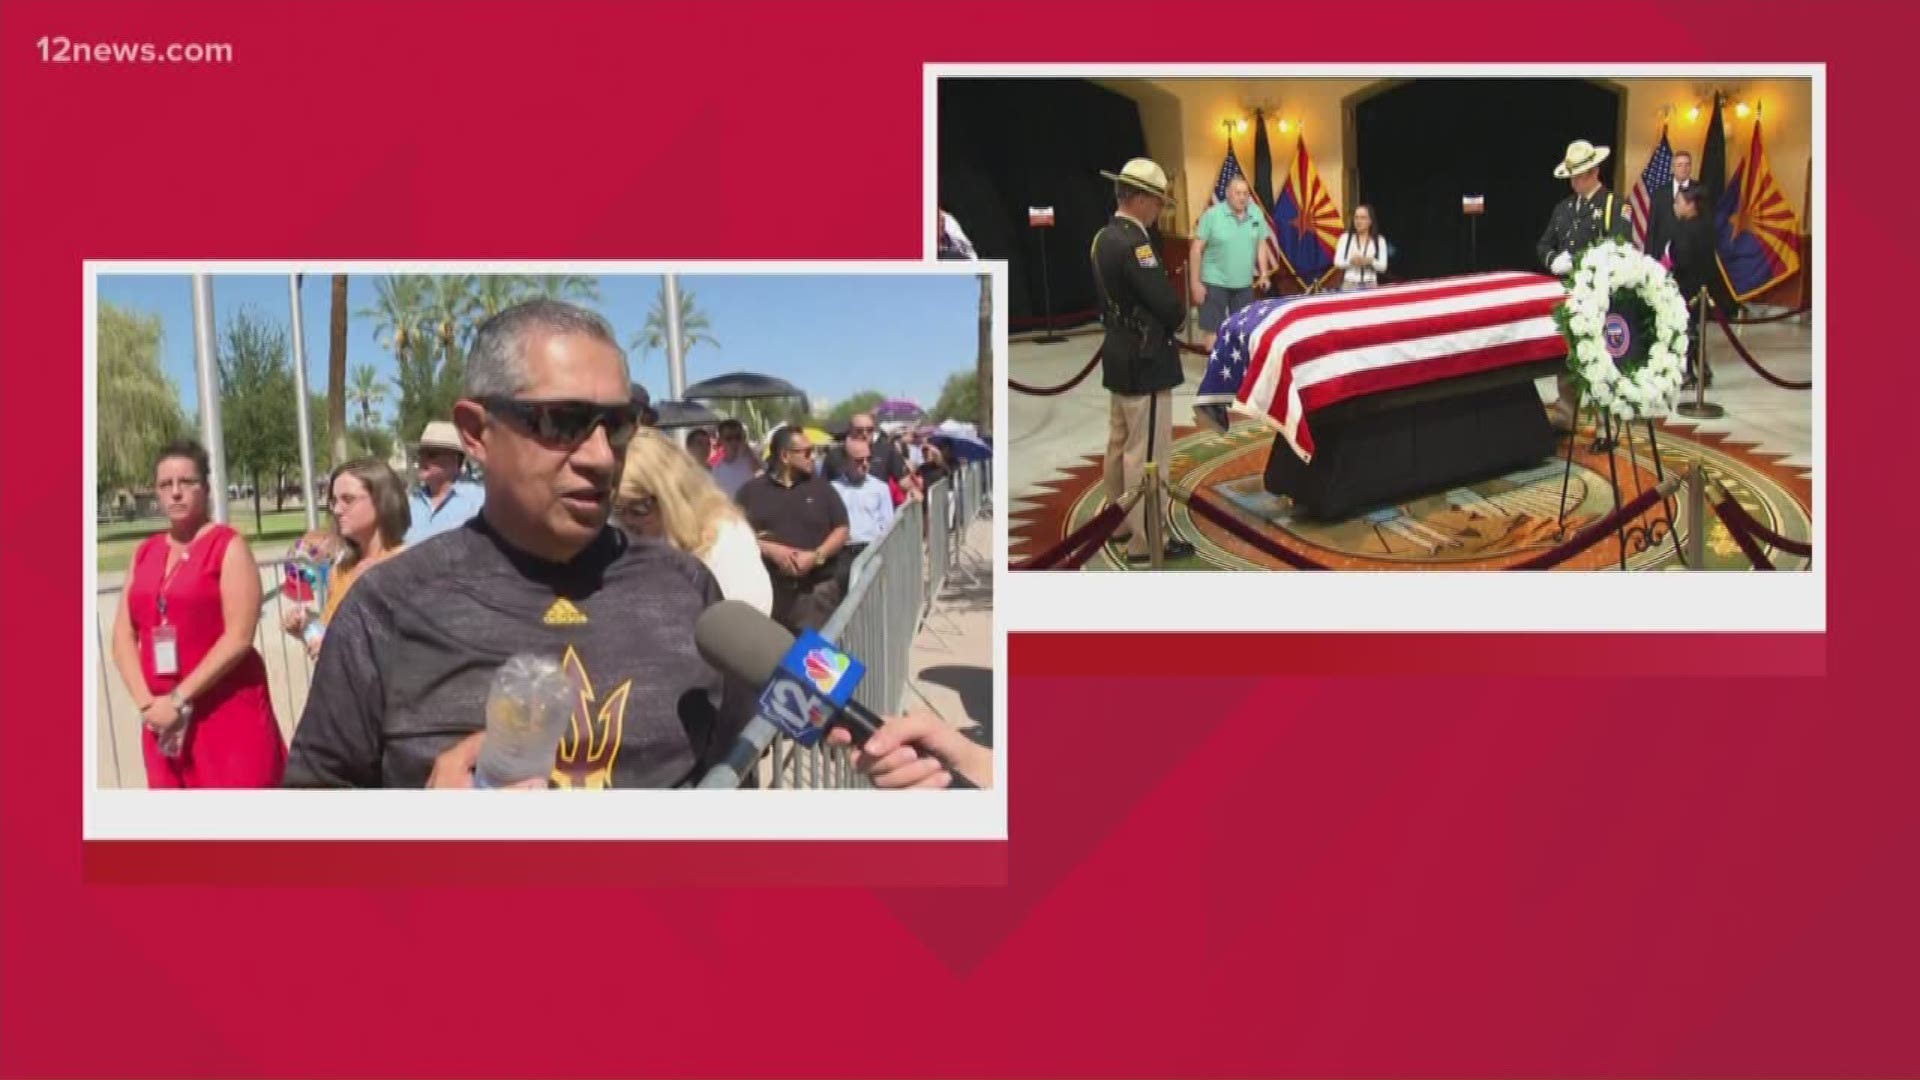 People from all political backgrounds and walks of life are lined up outside the State Capitol to pay their last respects to Senator McCain. We speak to one constituent who will remember the Senator for his humanity.